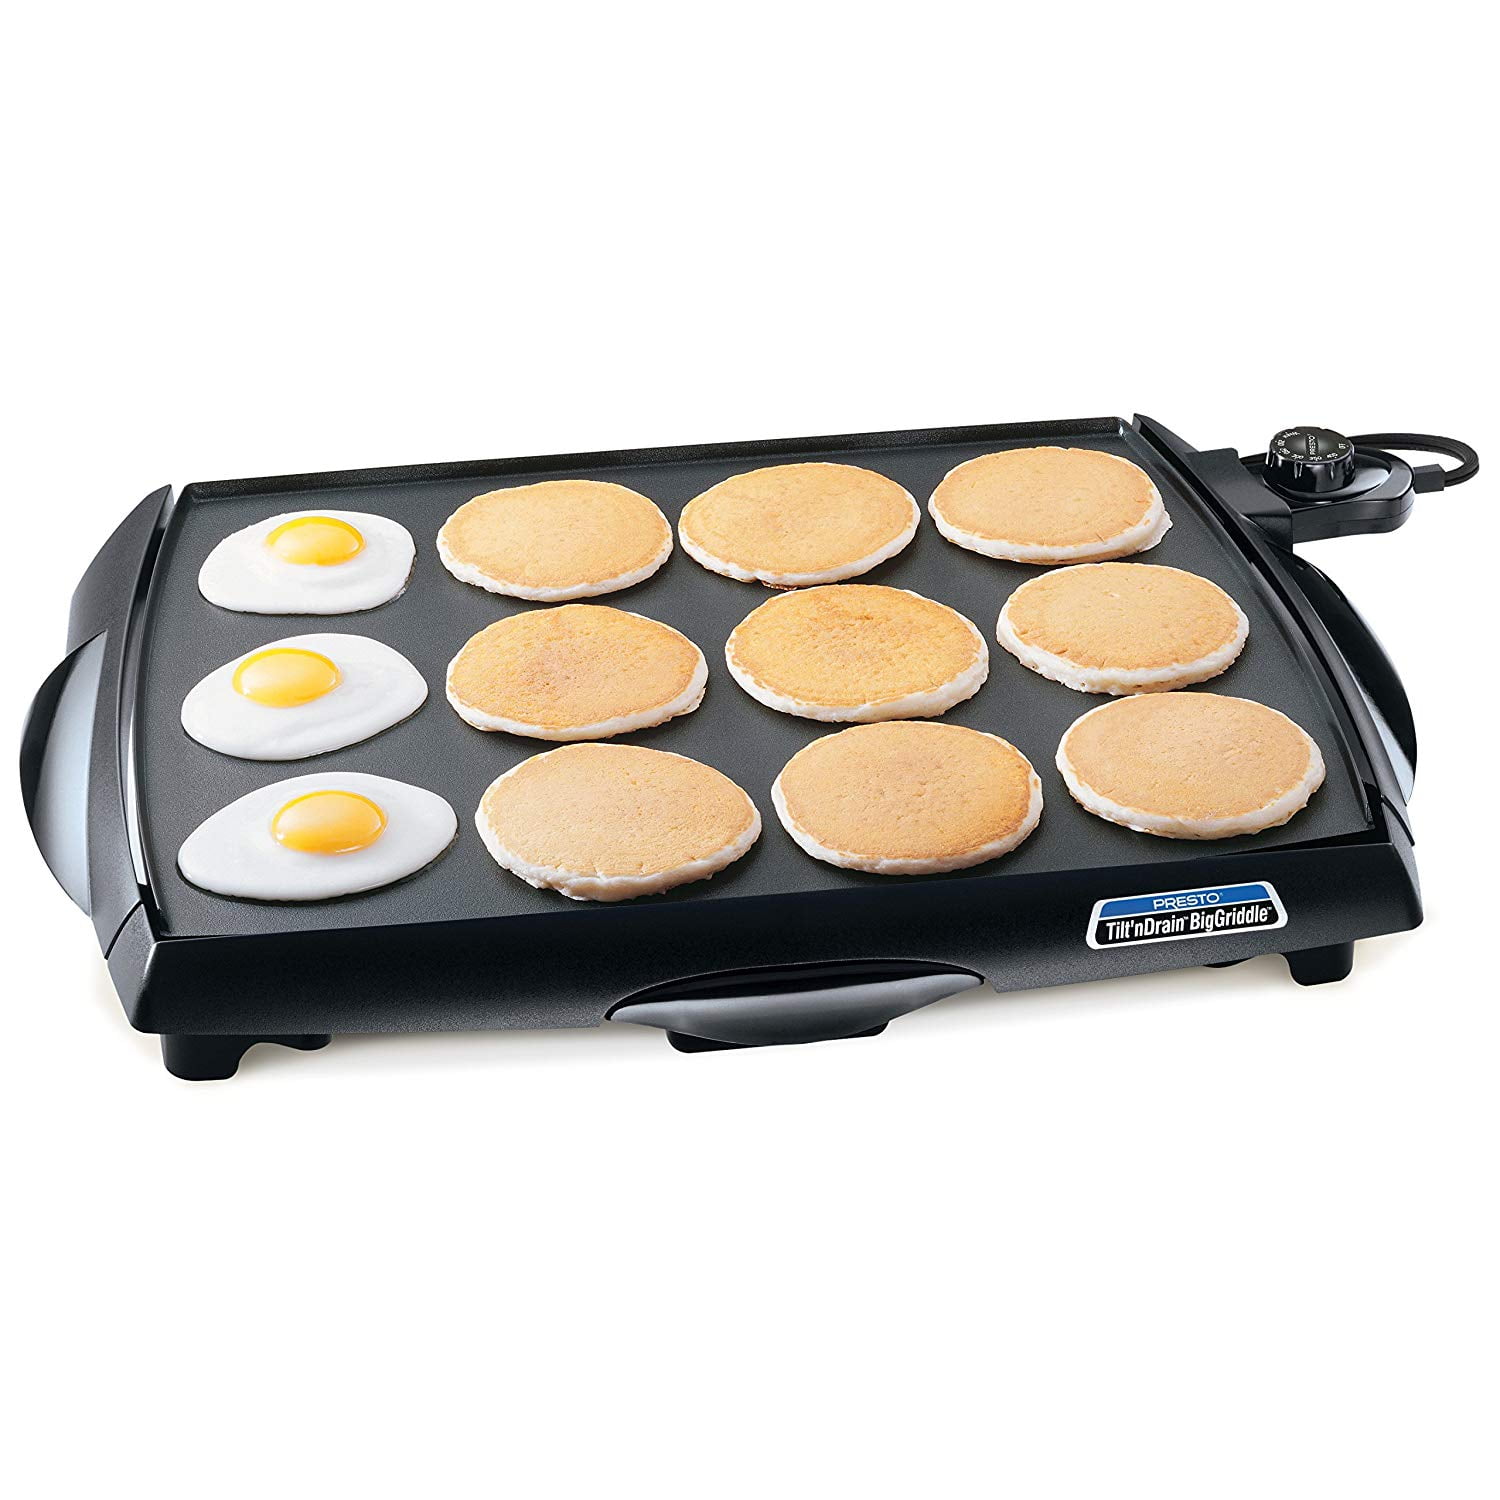 Oster DiamondForce 10 x 20 Nonstick Coating Infused with Diamonds Electric Griddle with Warming Tray